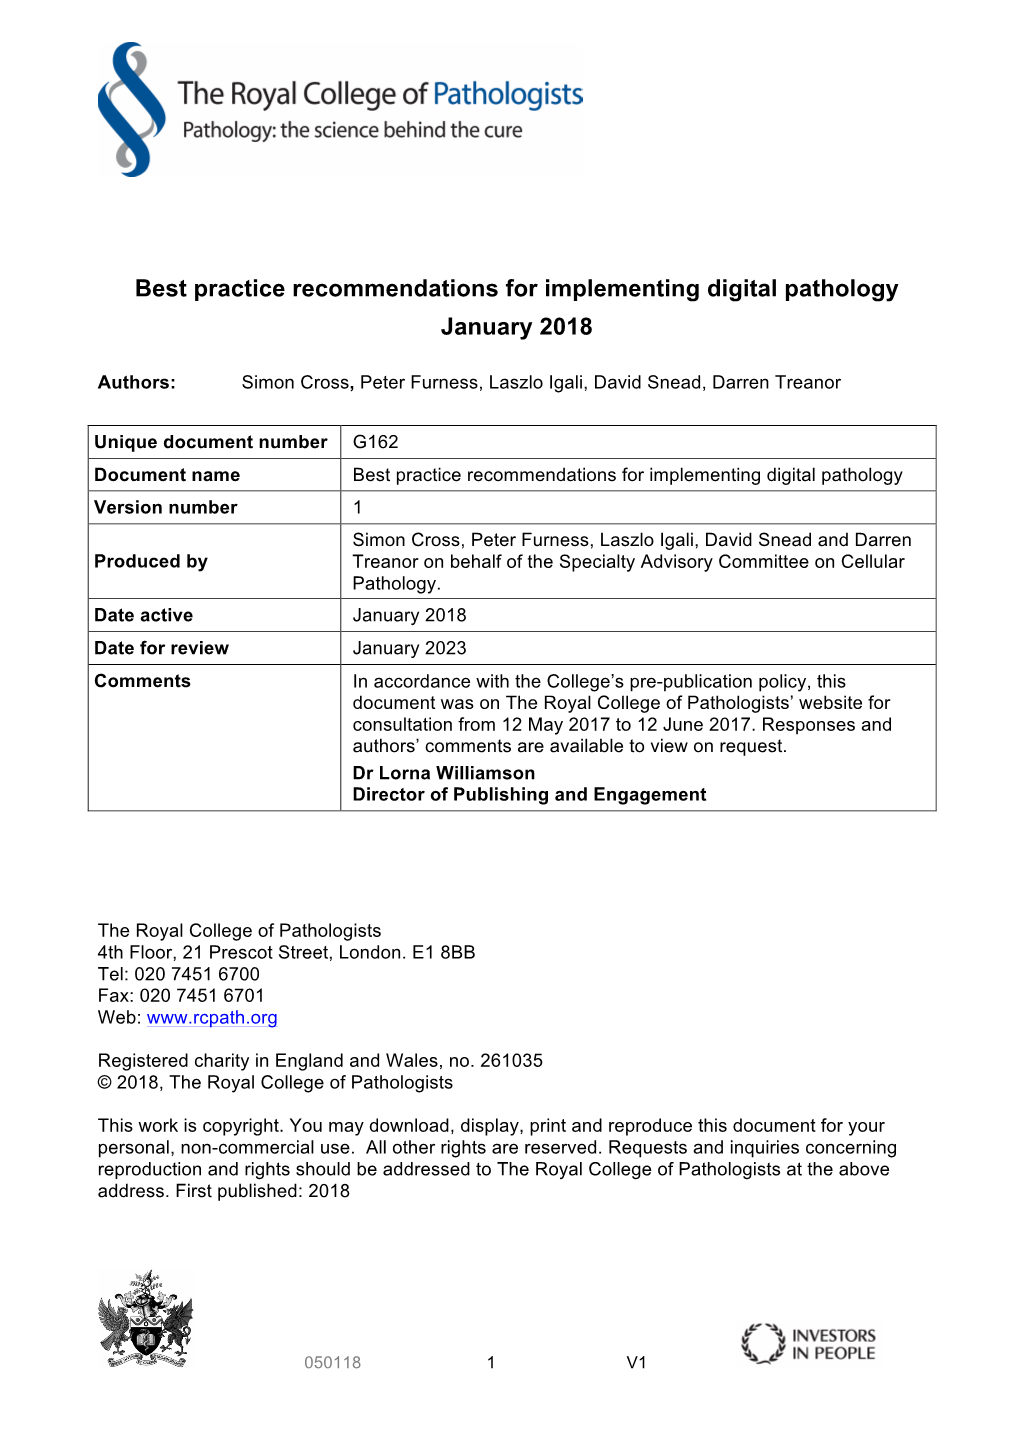 Best Practice Recommendations for Implementing Digital Pathology January 2018